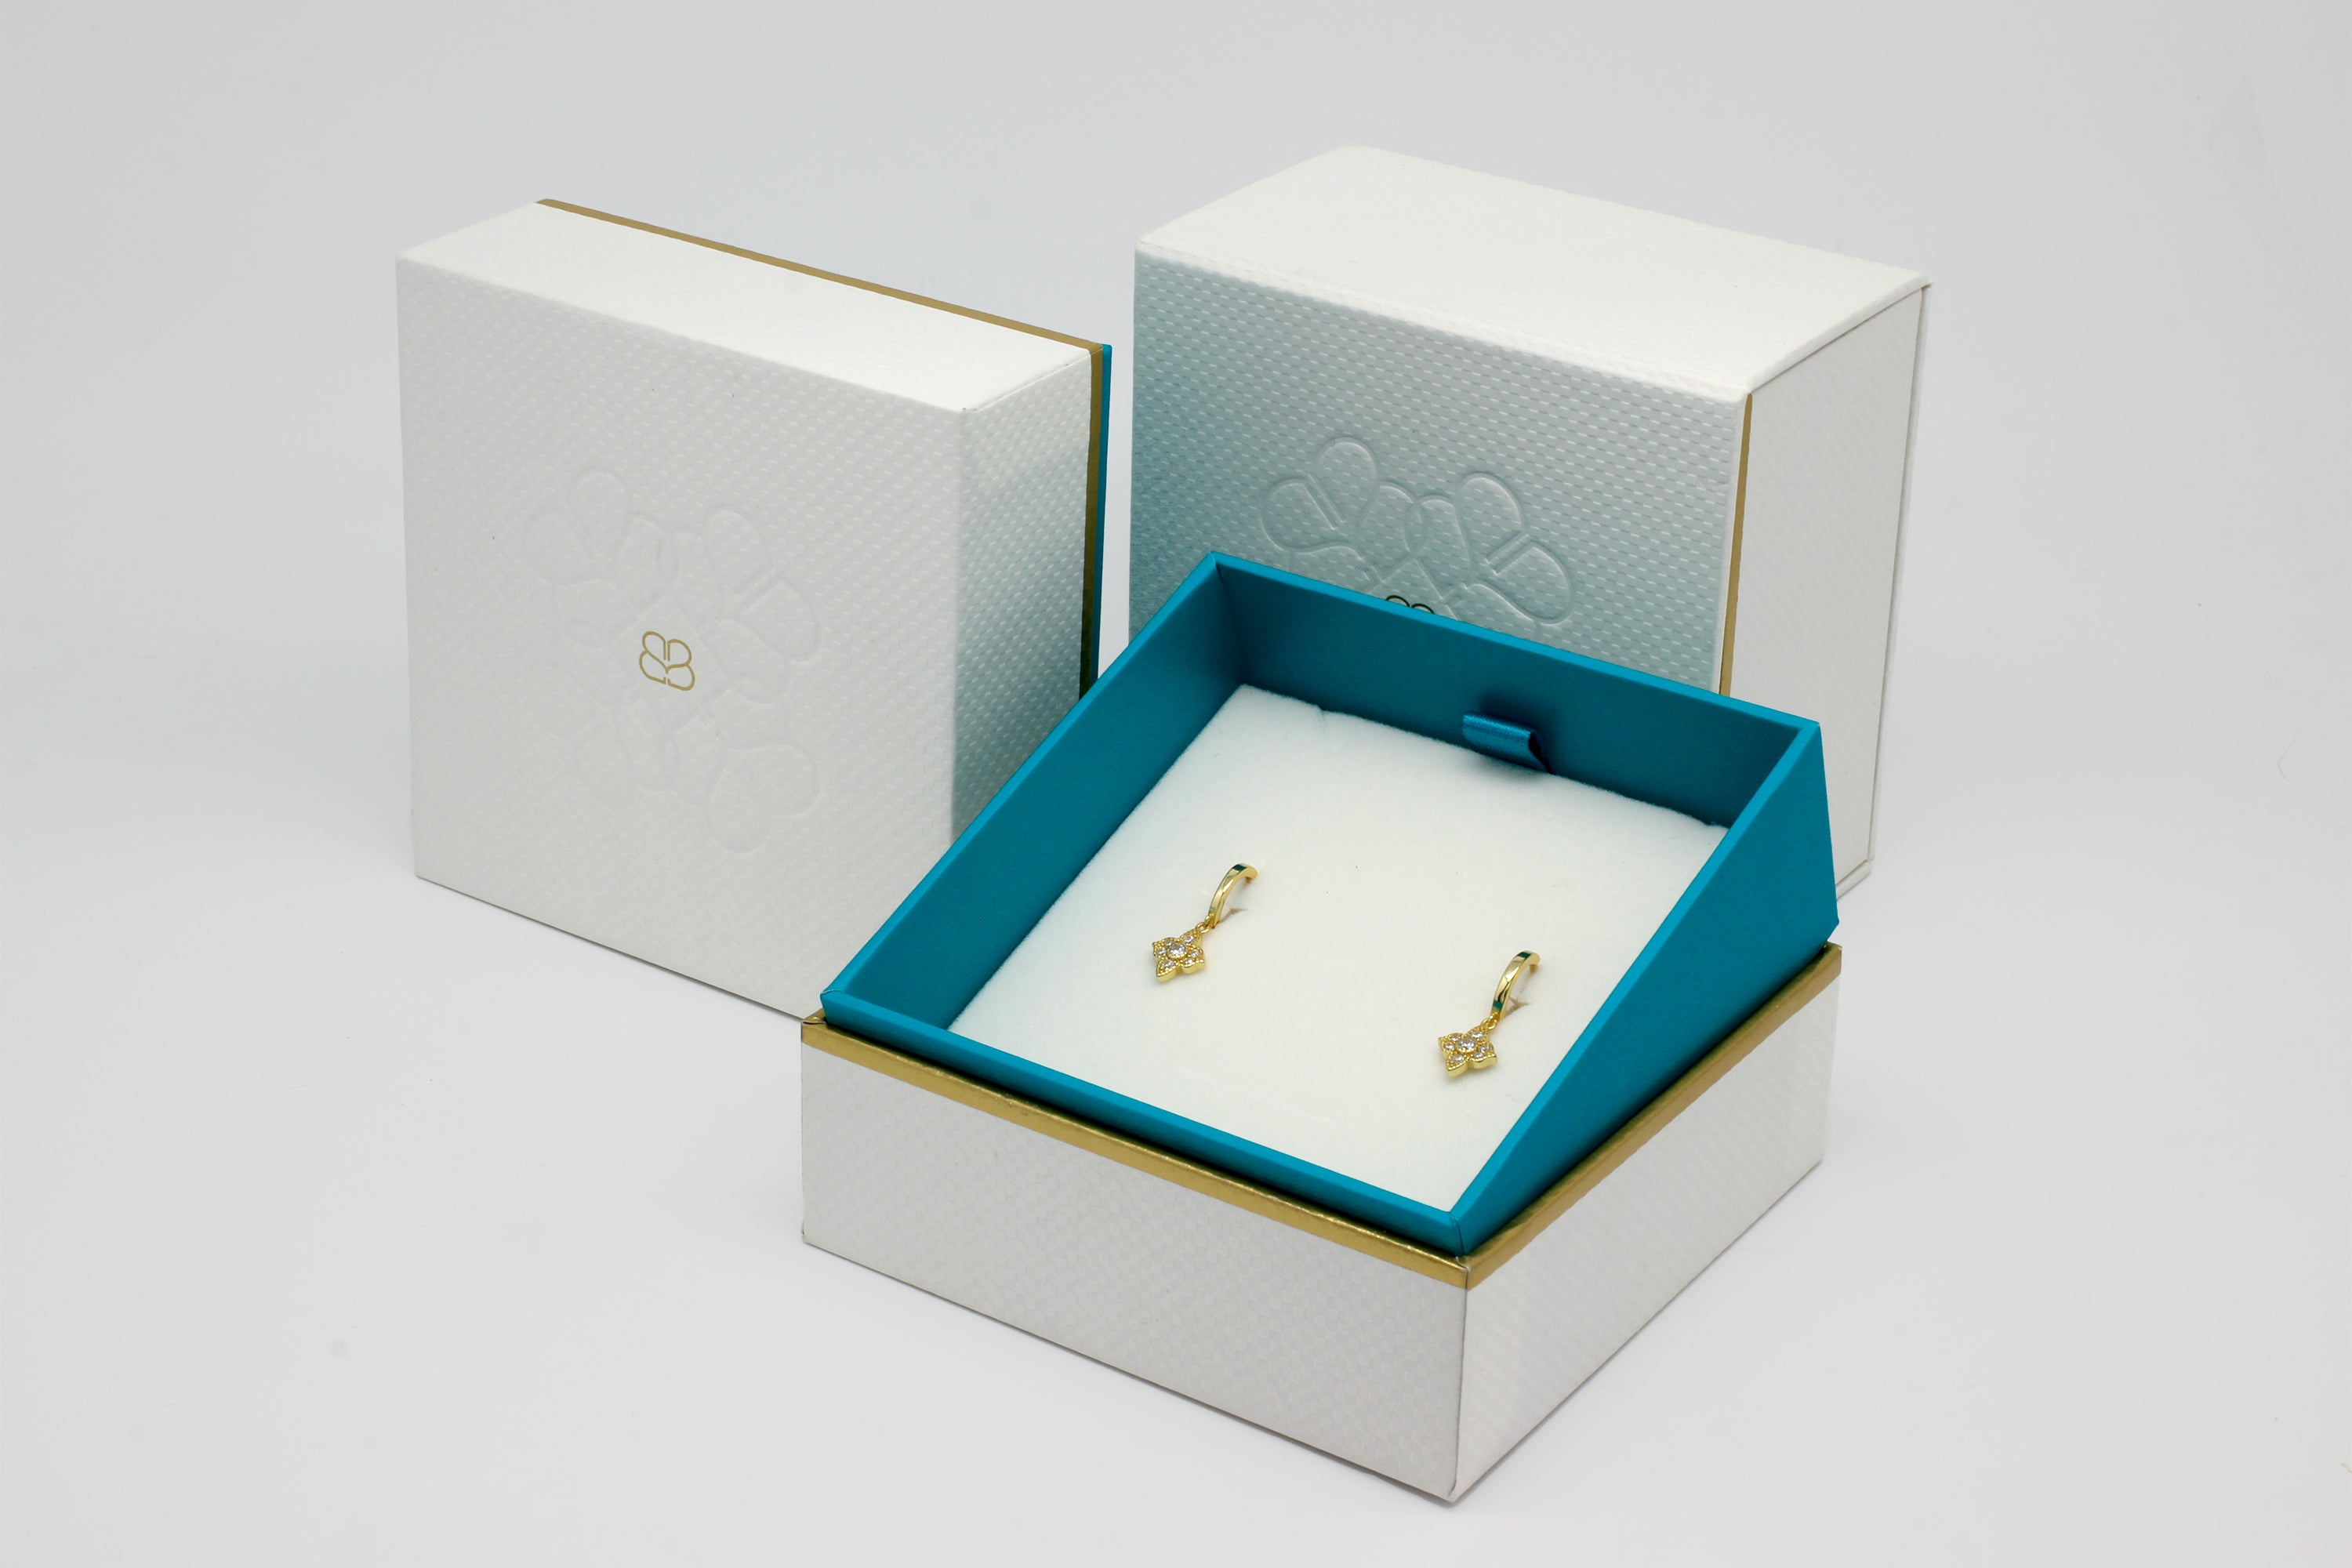 Panacea Gold Necklace & Earring Gift Set